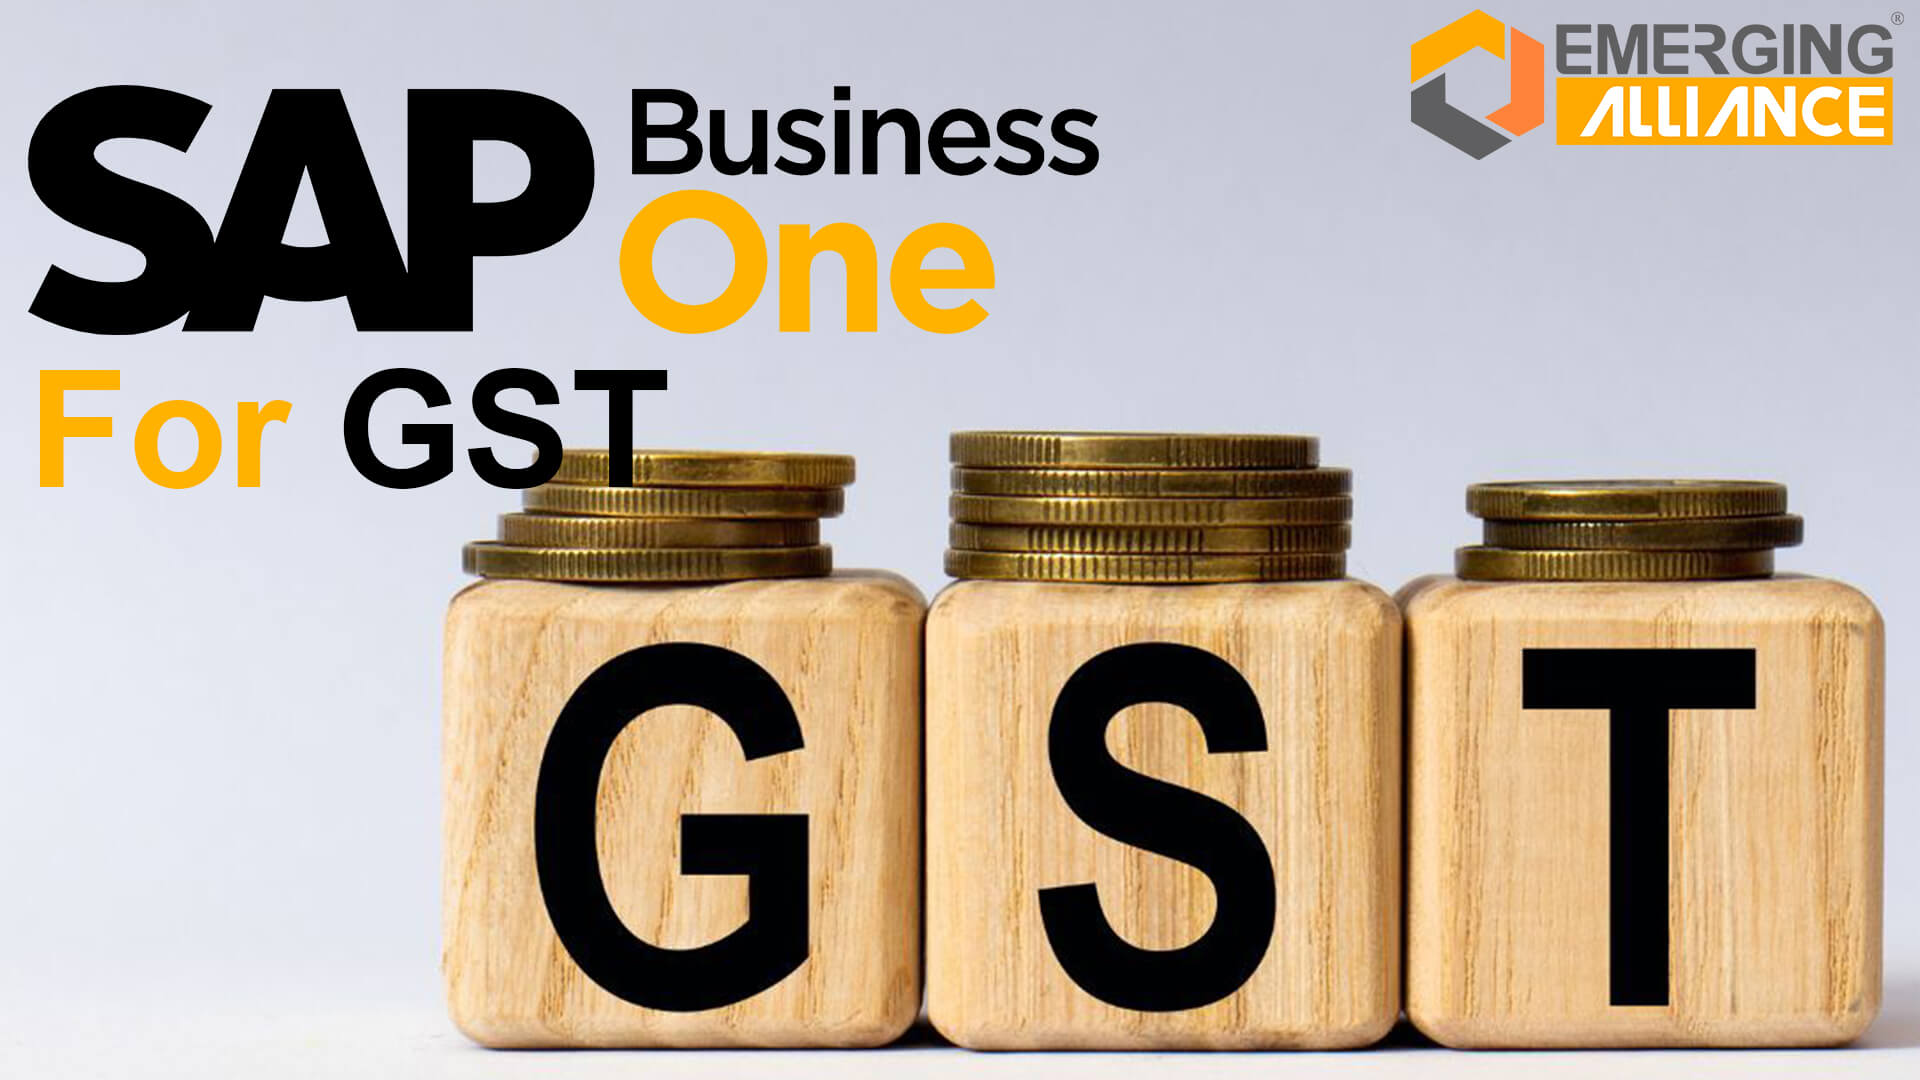 sap business one for GST